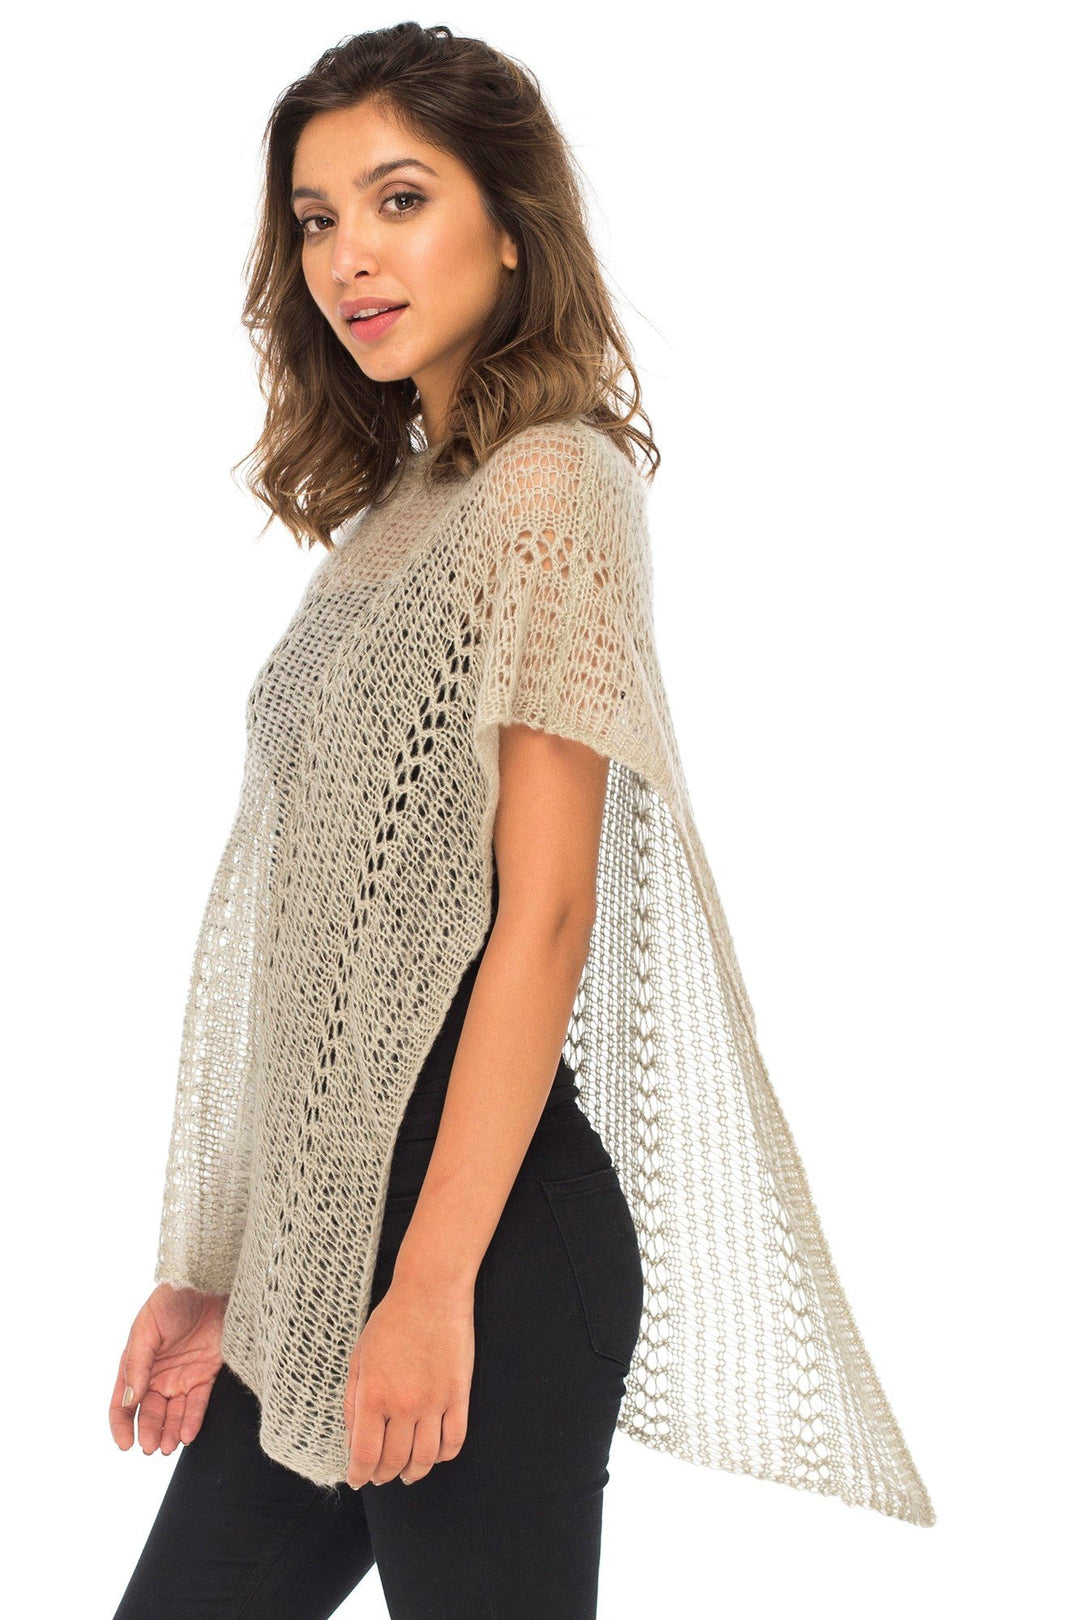 Back From Bali Womens Shrug Poncho, Lightweight Shrug Pullover Sweater Soft